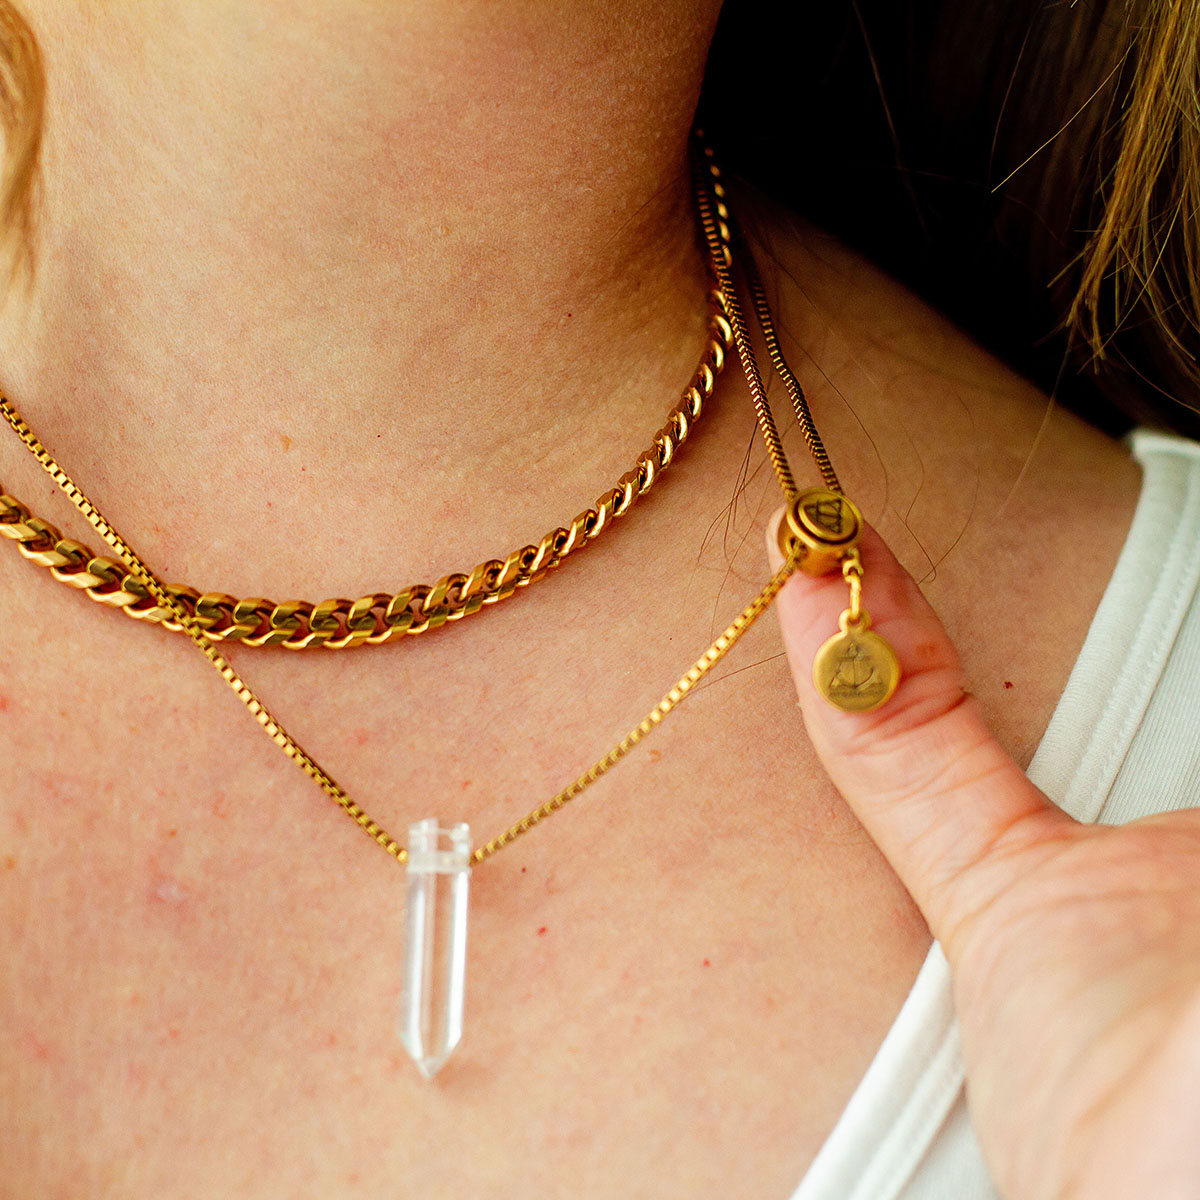 23 Stylish Mother’s Day Jewelry Gifts & Accessories To Make Her Sparkle